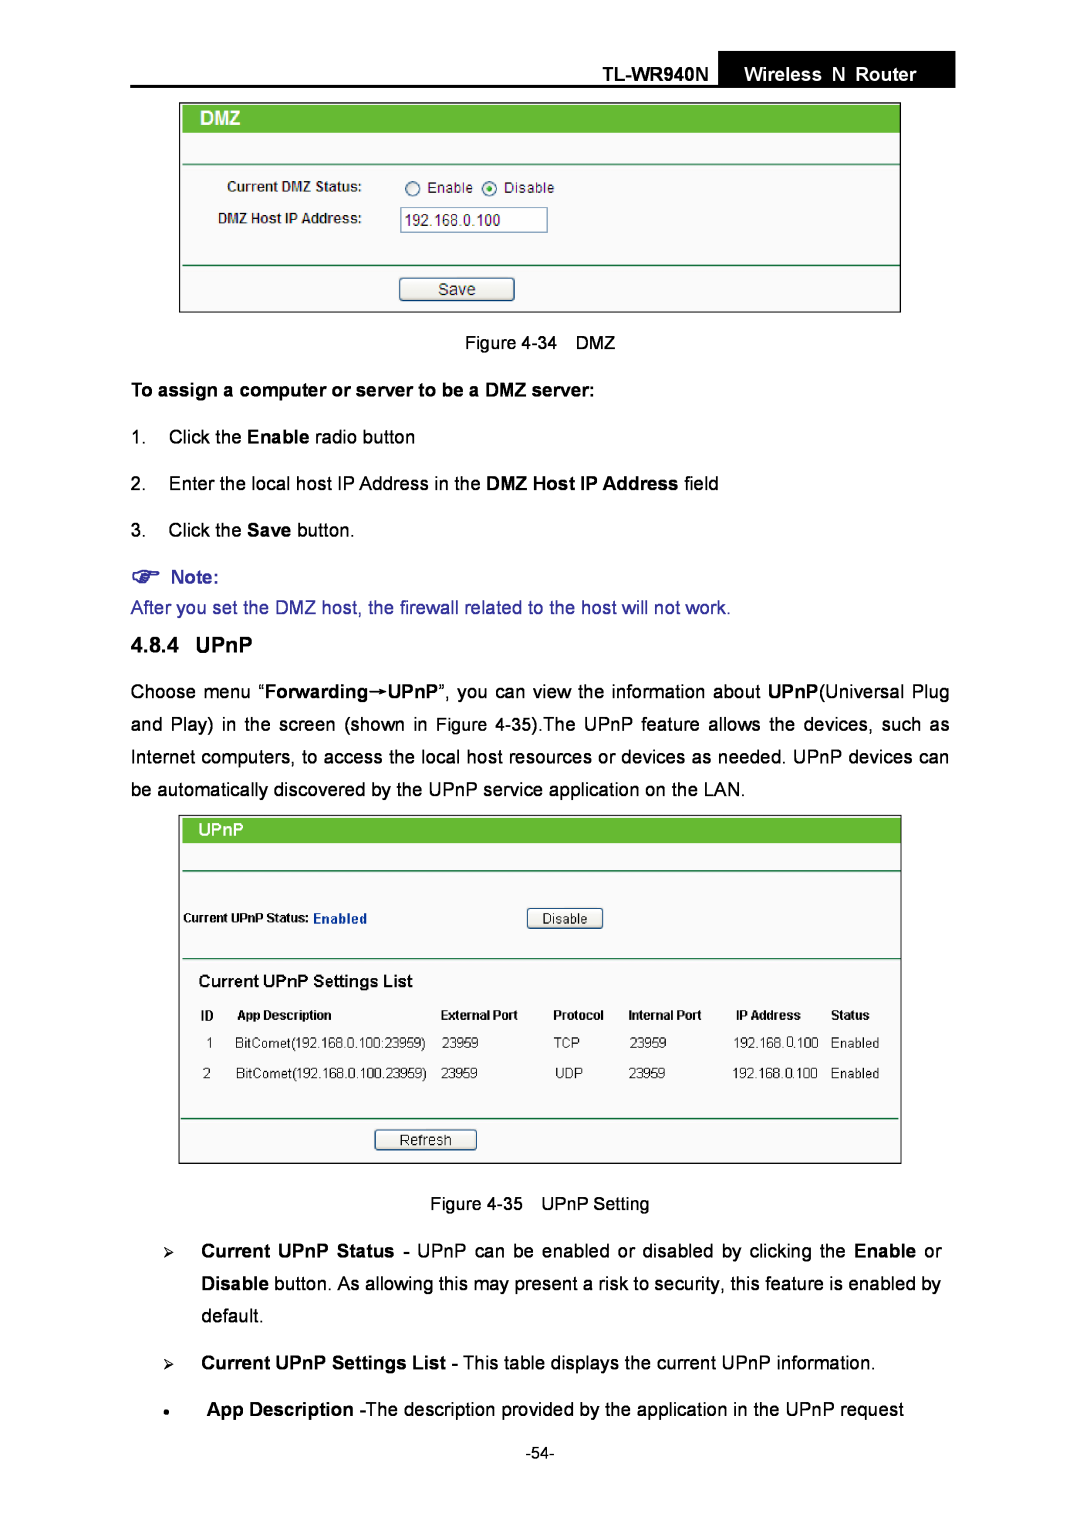 TP-Link manual UPnP, To assign a computer or server to be a DMZ server, TL-WR940N Wireless N Router 